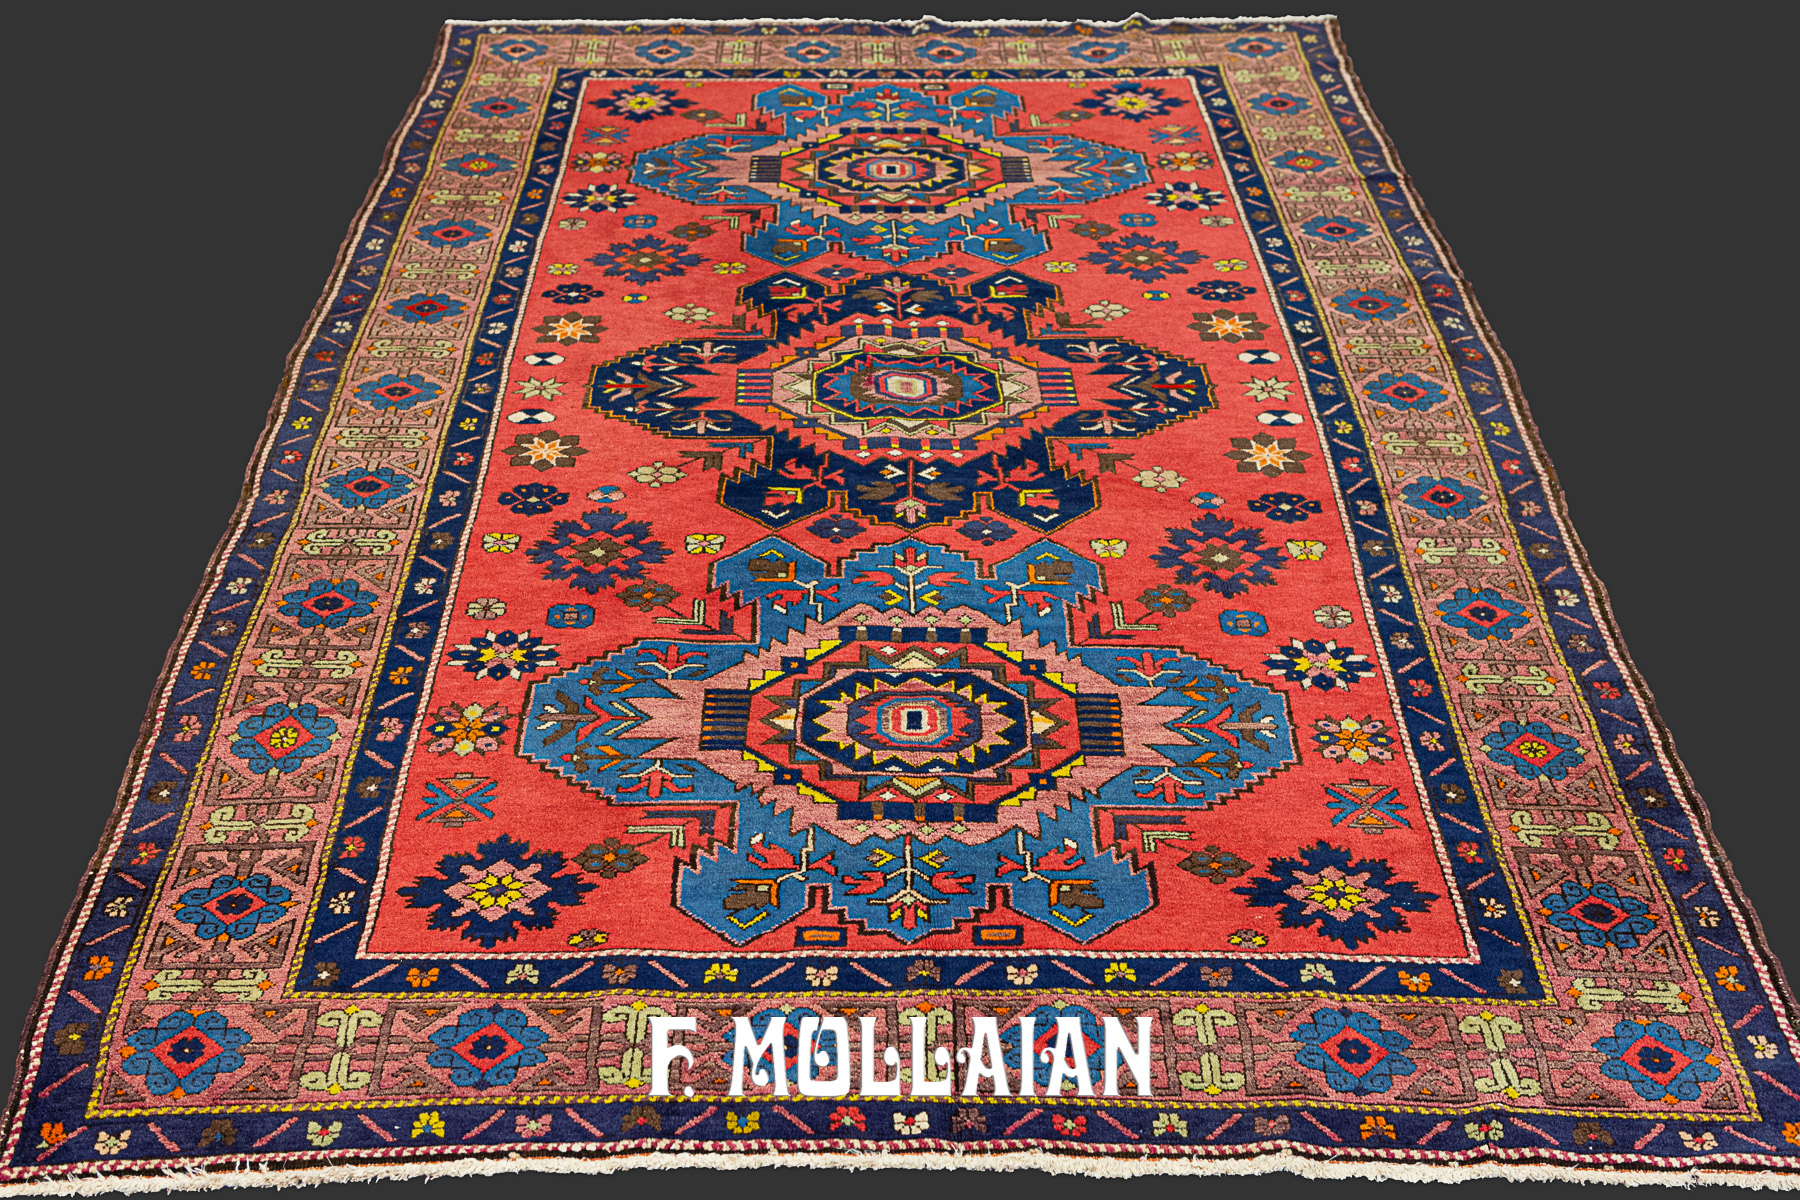 Antique Caucasian Lezghi Bold Design Hand-Knotted Rug n°:89205508